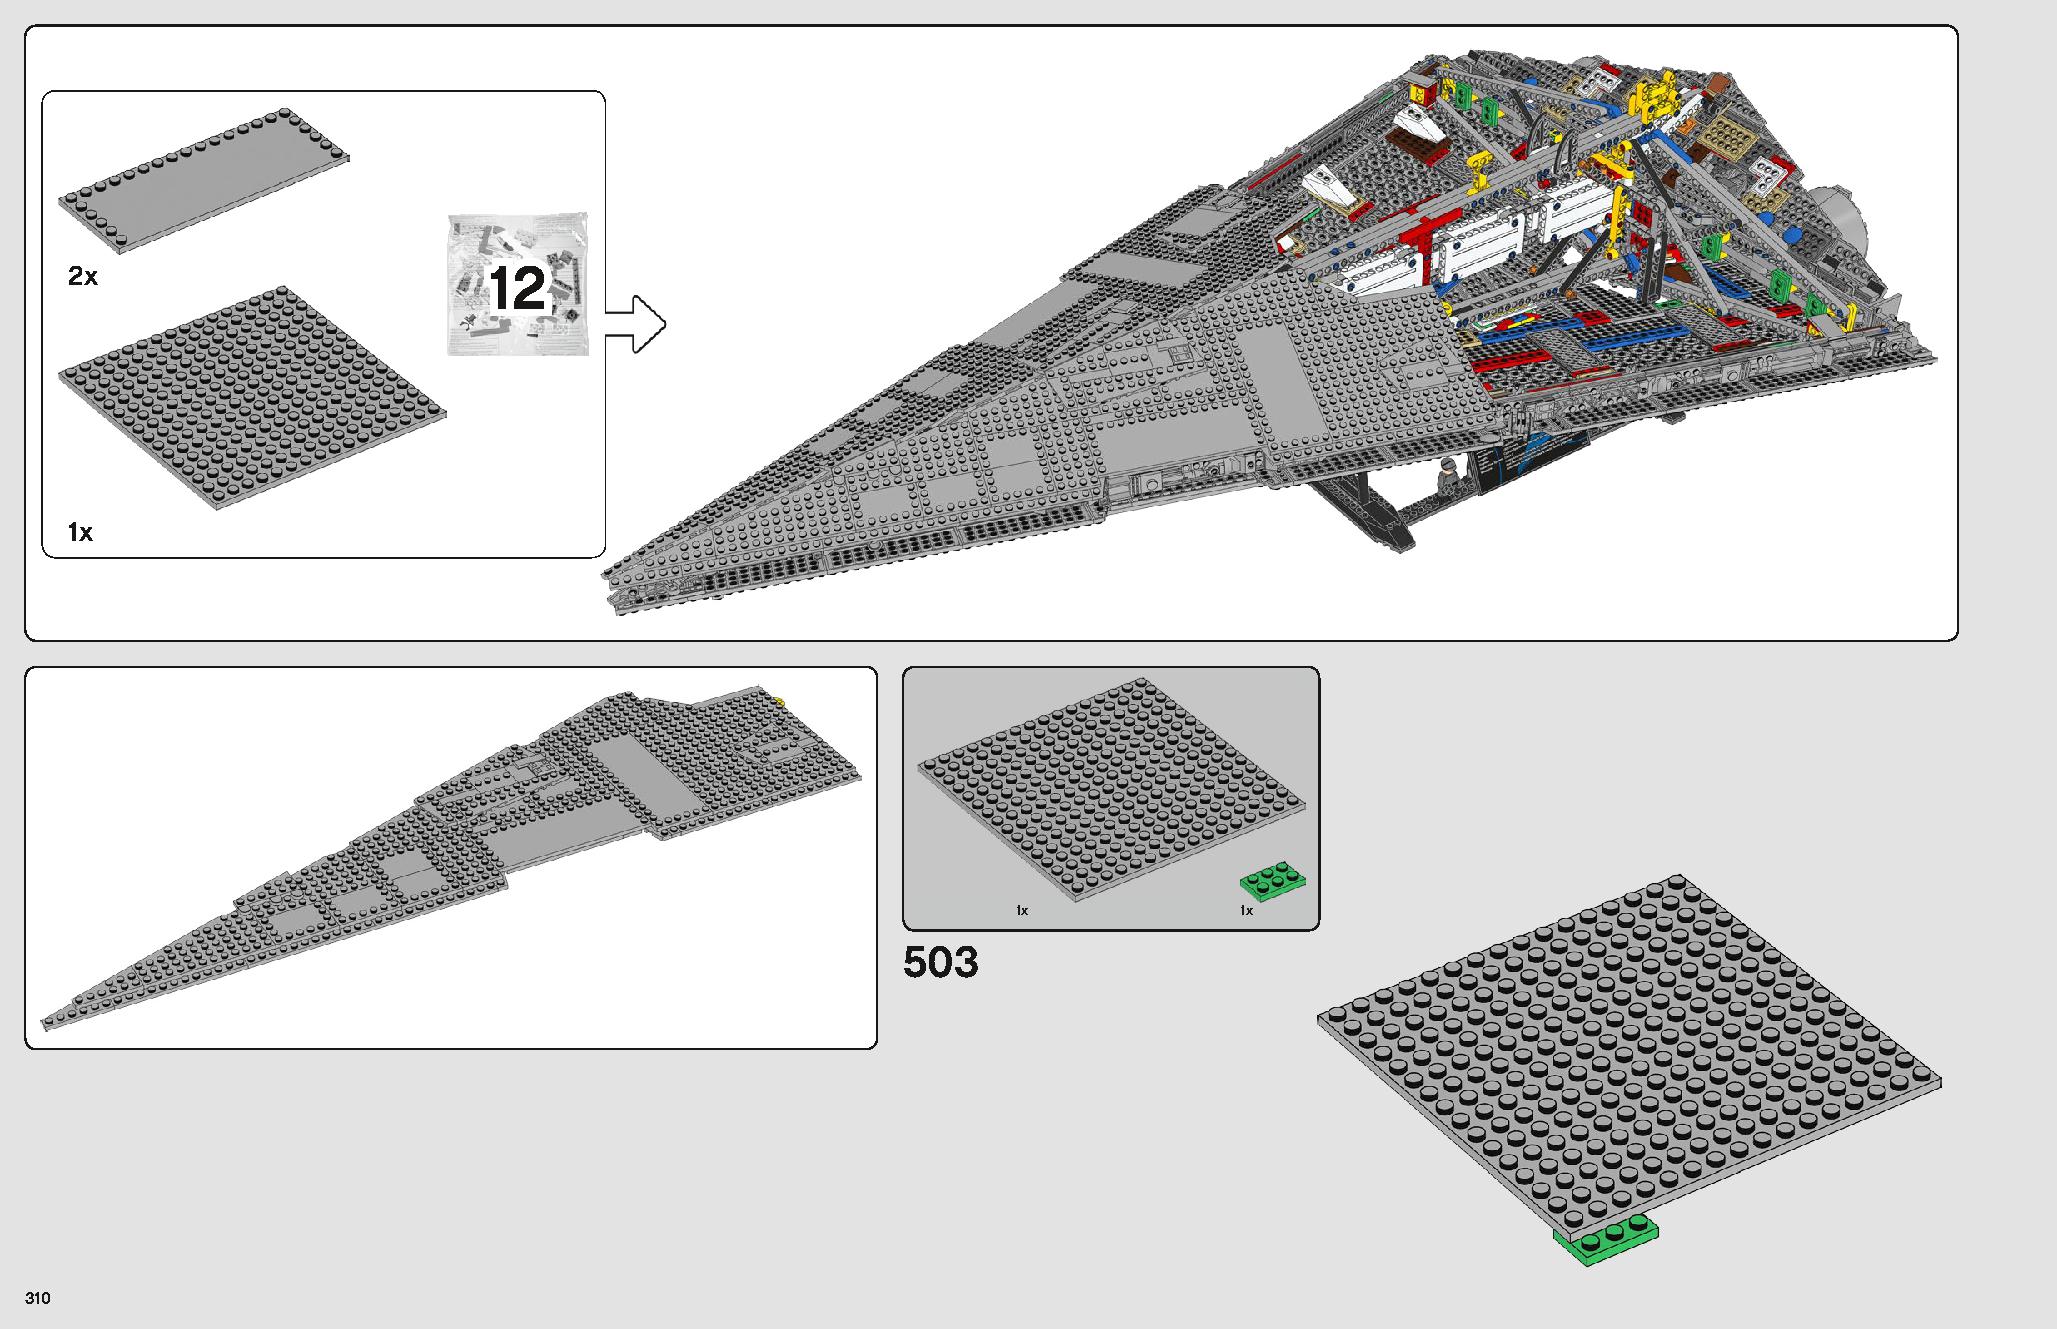 Imperial Star Destroyer 75252 レゴの商品情報 レゴの説明書・組立方法 310 page